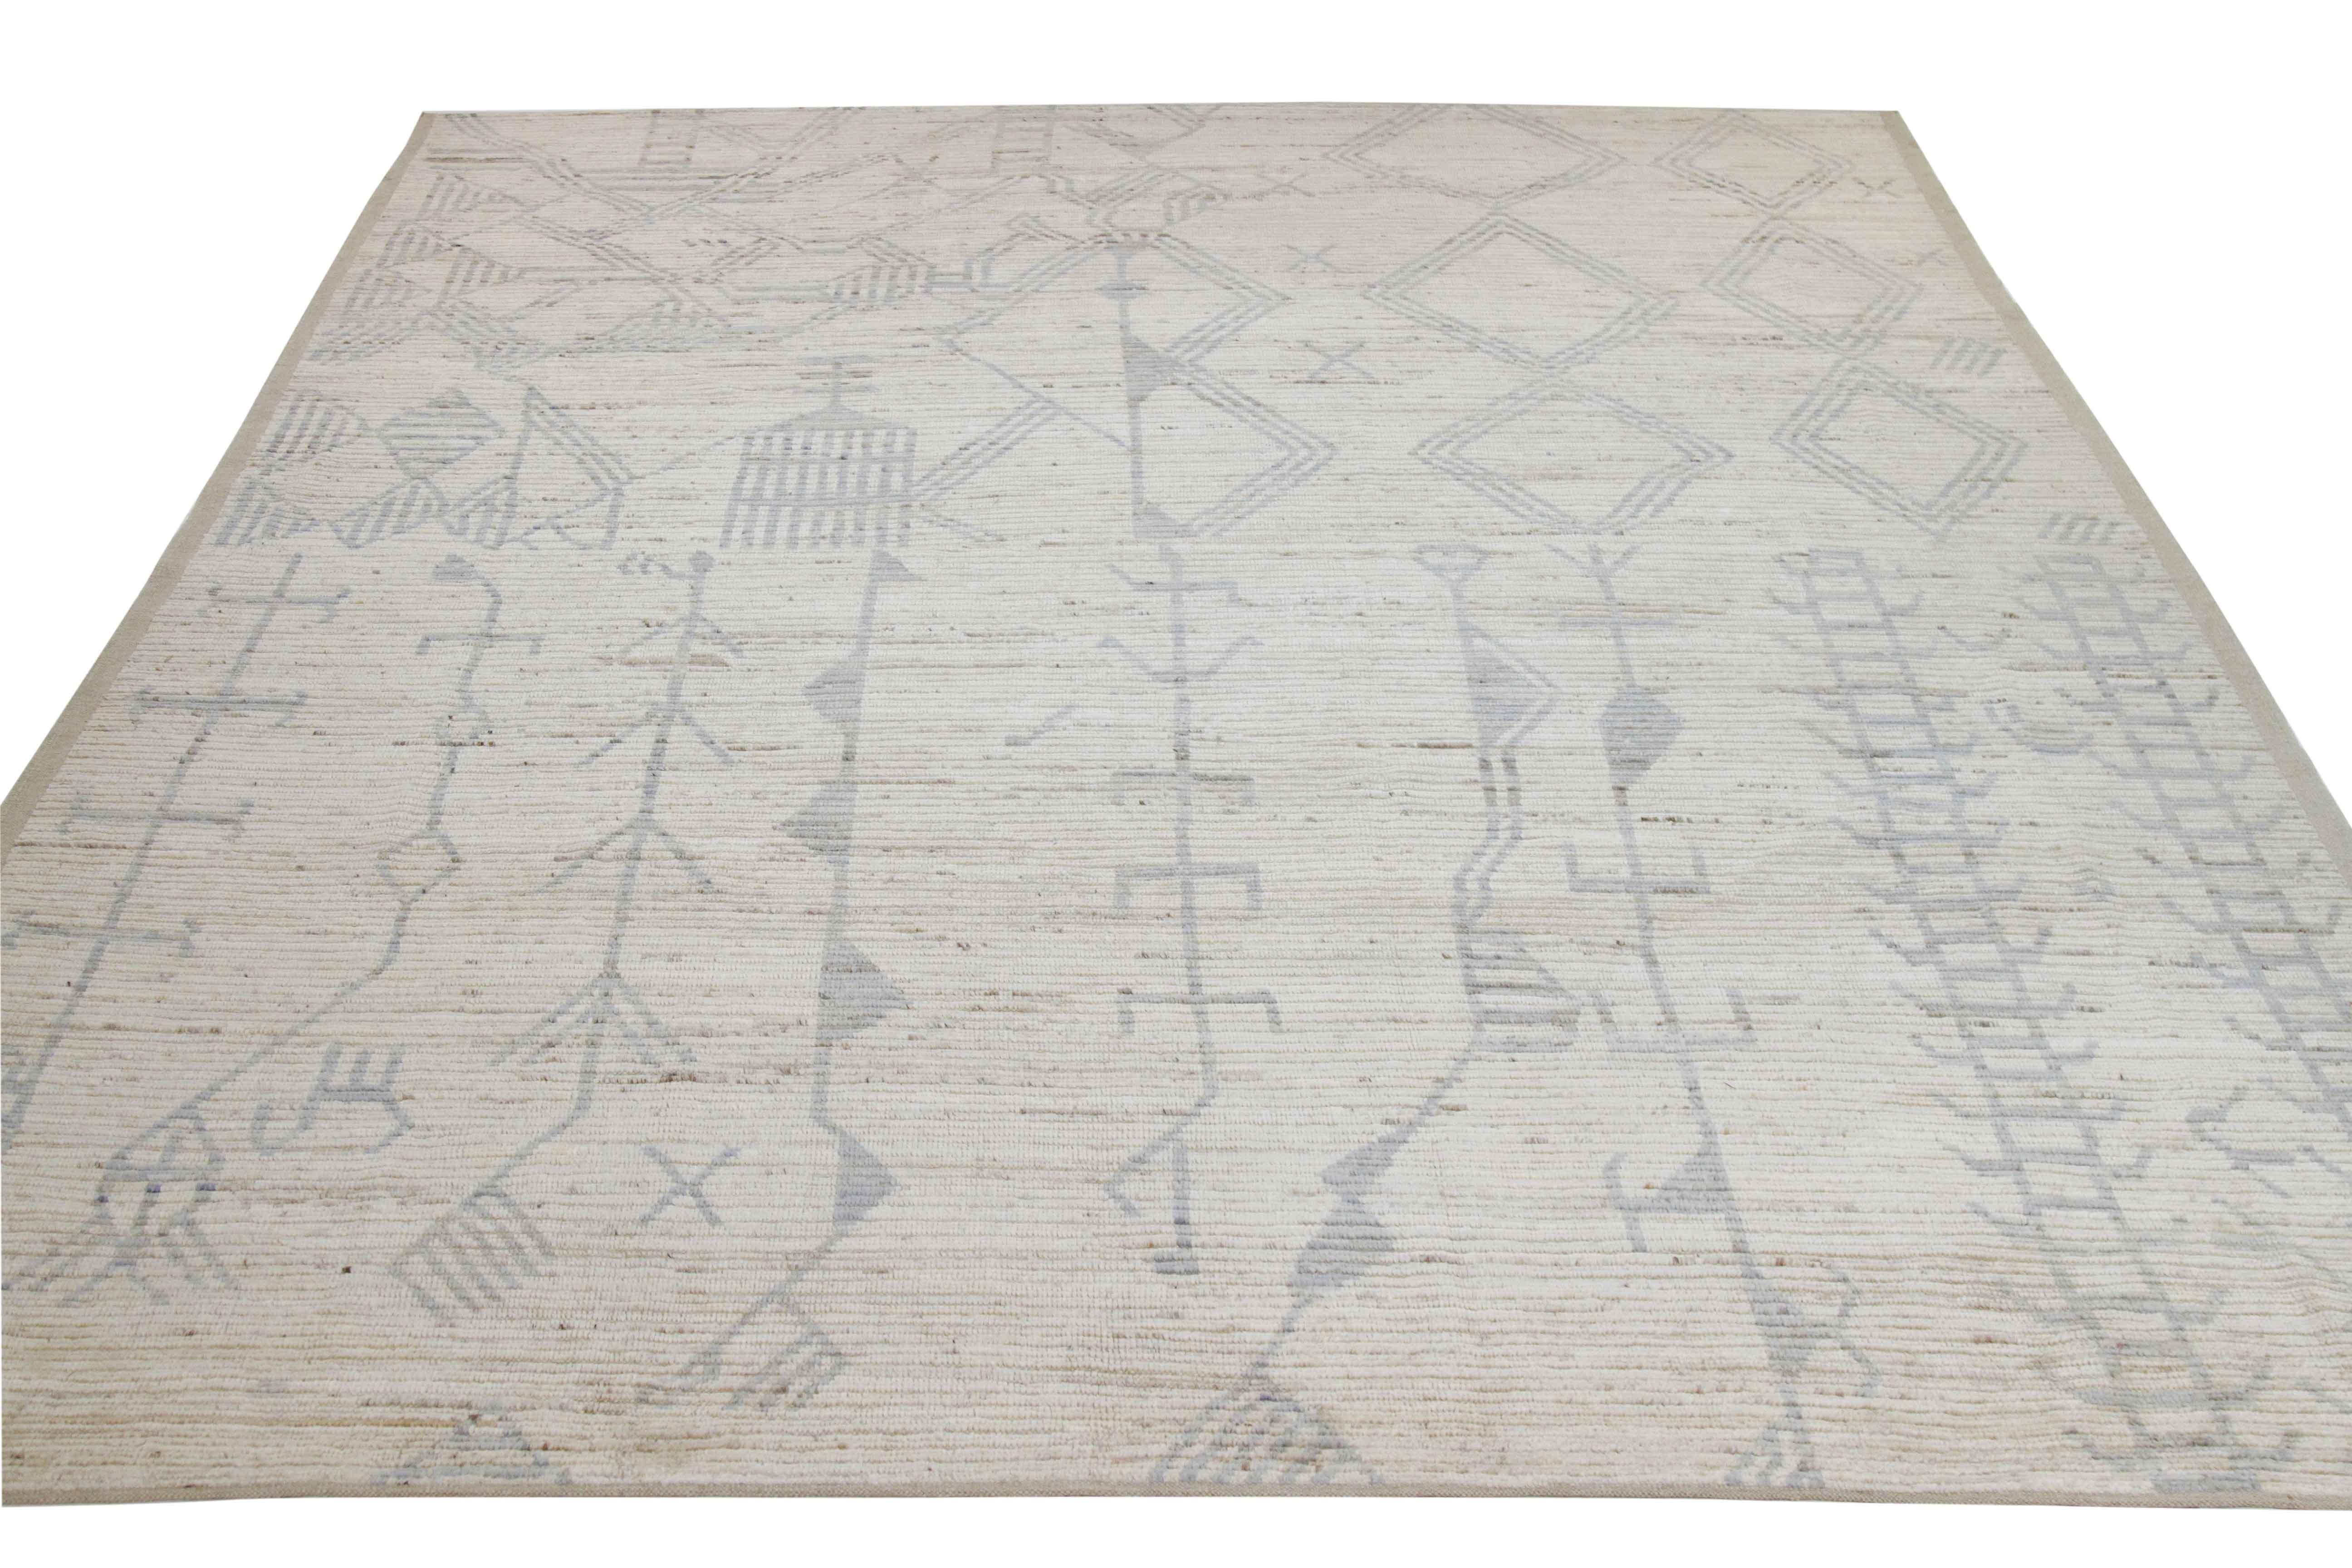 Modern Afghan rug handwoven from the finest sheep’s wool and colored with all-natural vegetable dyes that are safe for humans and pets. It’s a traditional Afghan weaving featuring a Moroccan inspired design highlighted by a gray mix of tribal